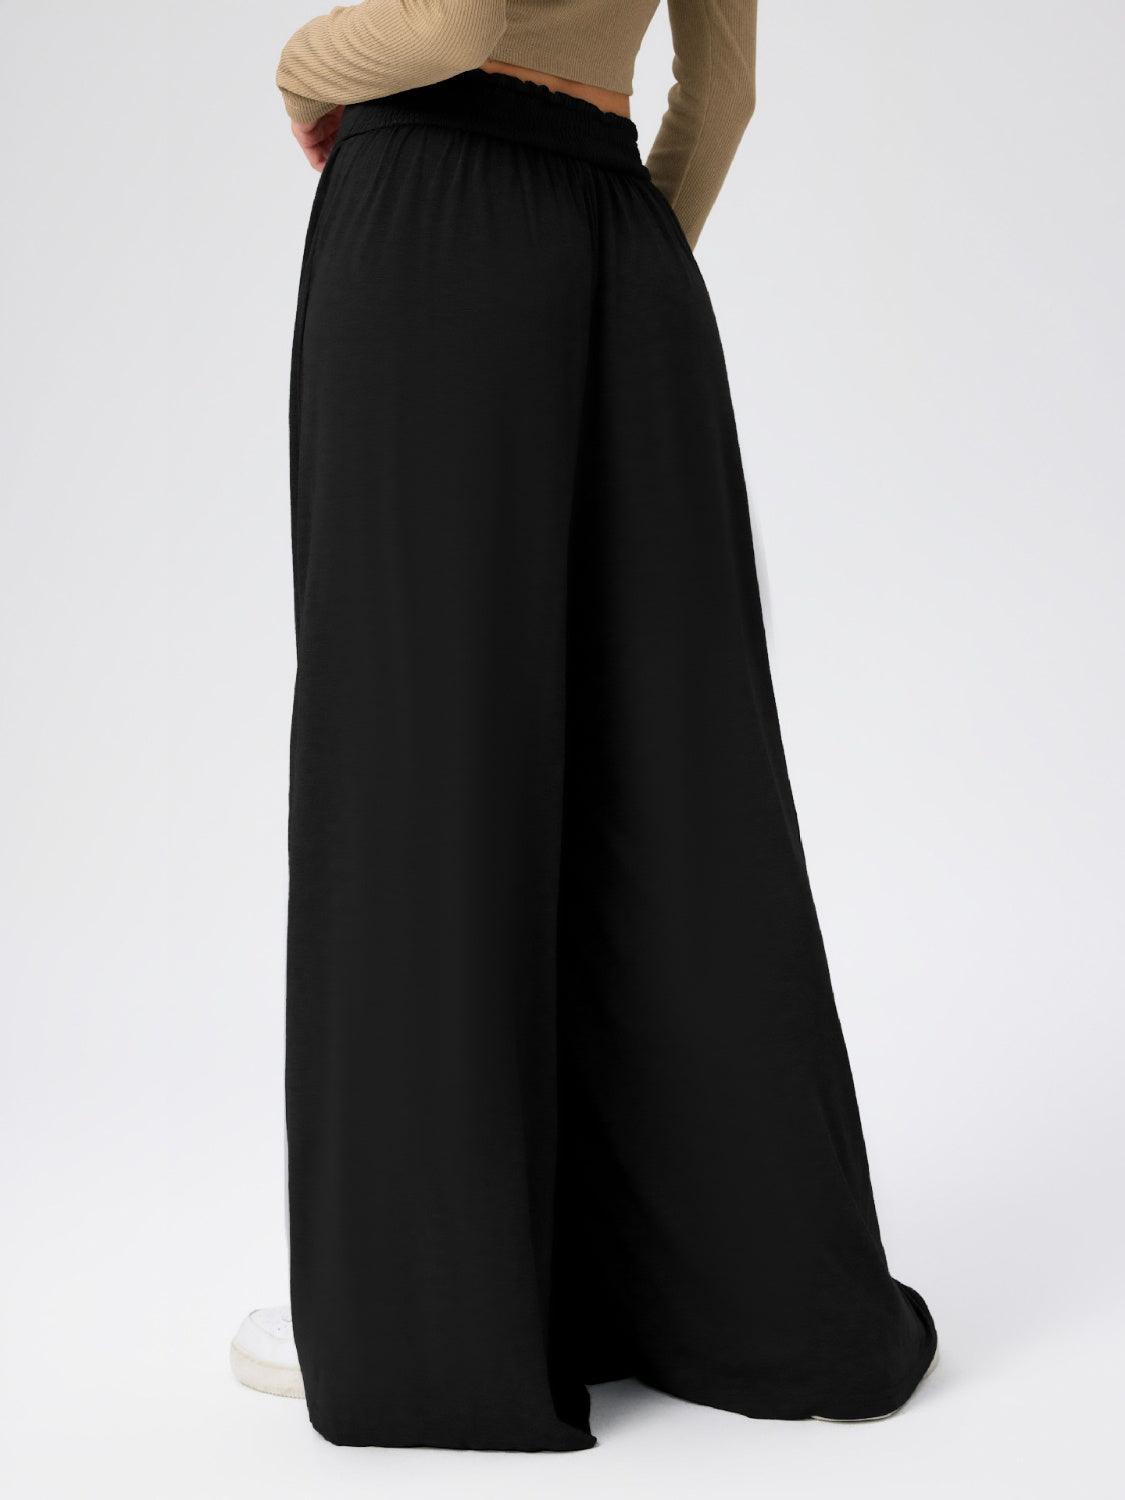 High Waist Wide Leg Pants in 6 Colors - Olive Ave